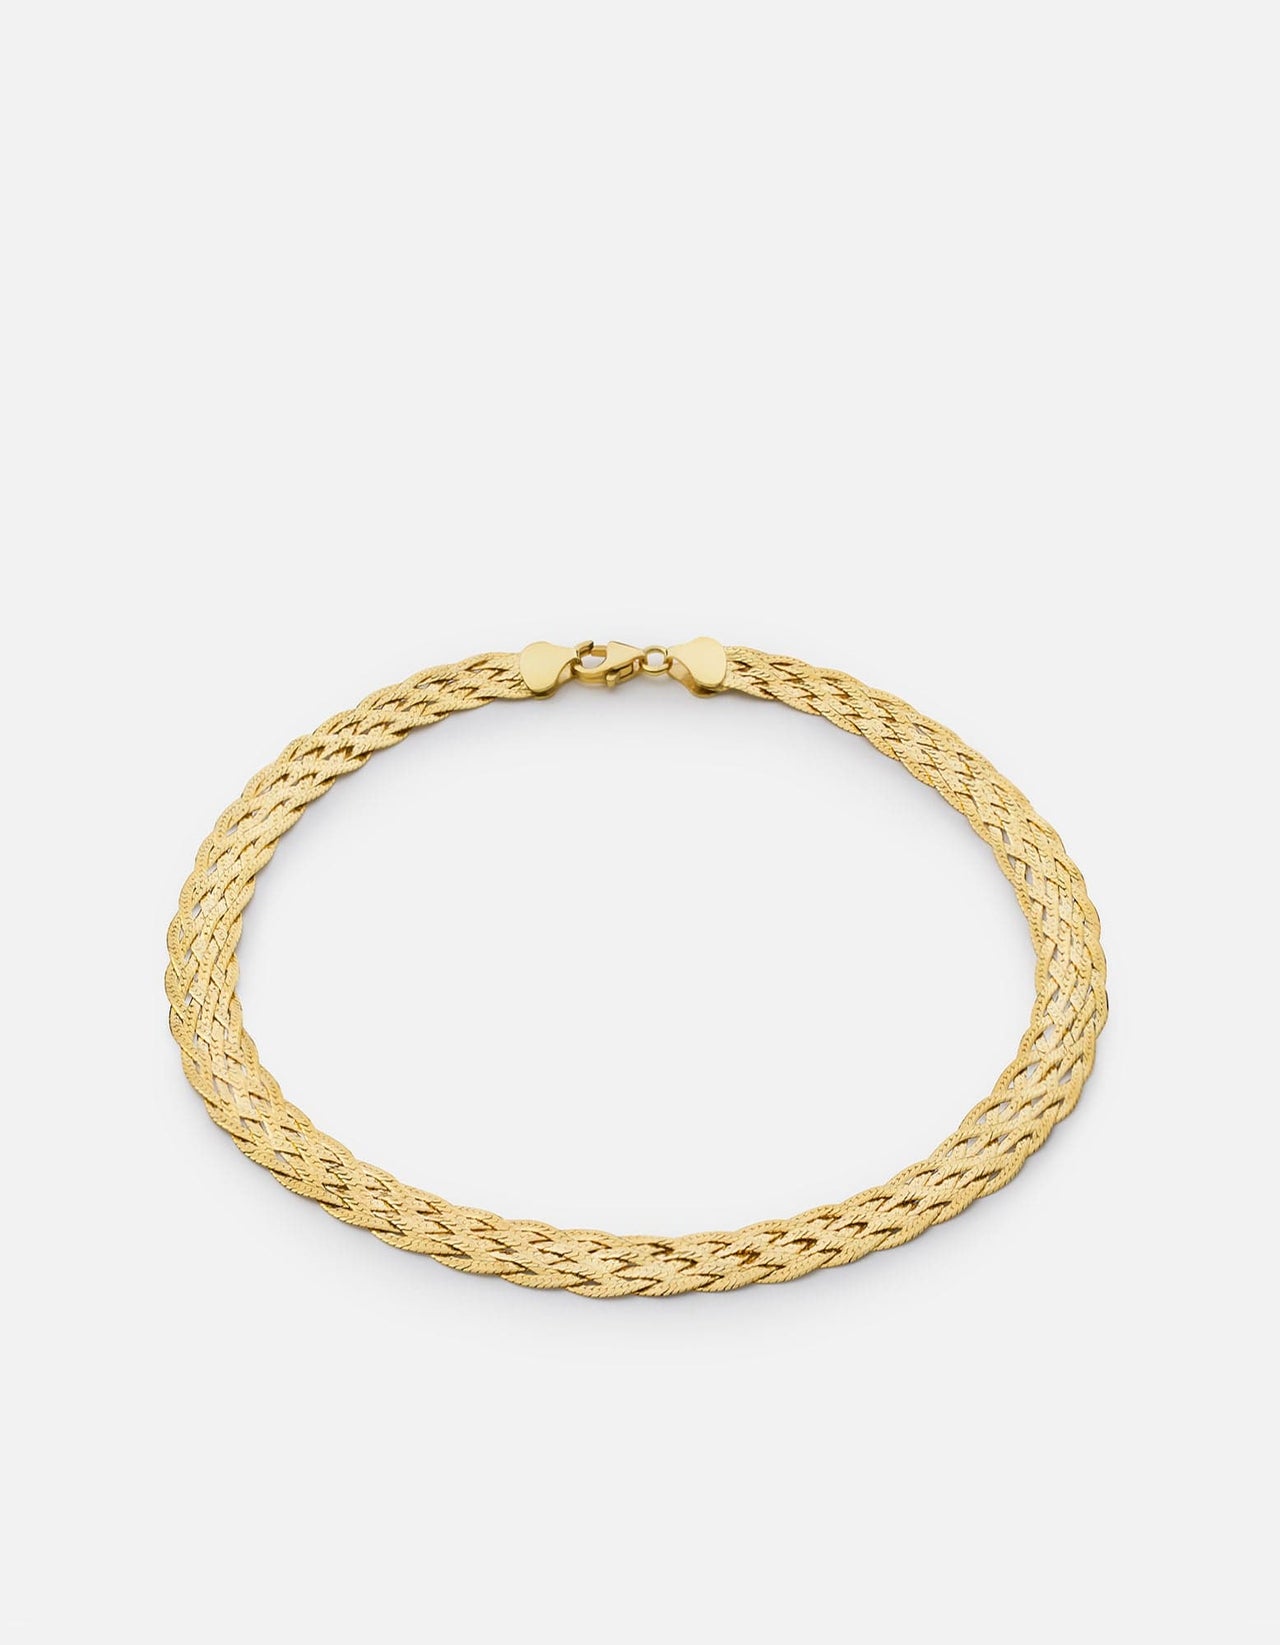 Miansai Men's Rope Chain Necklace in Polished Gold